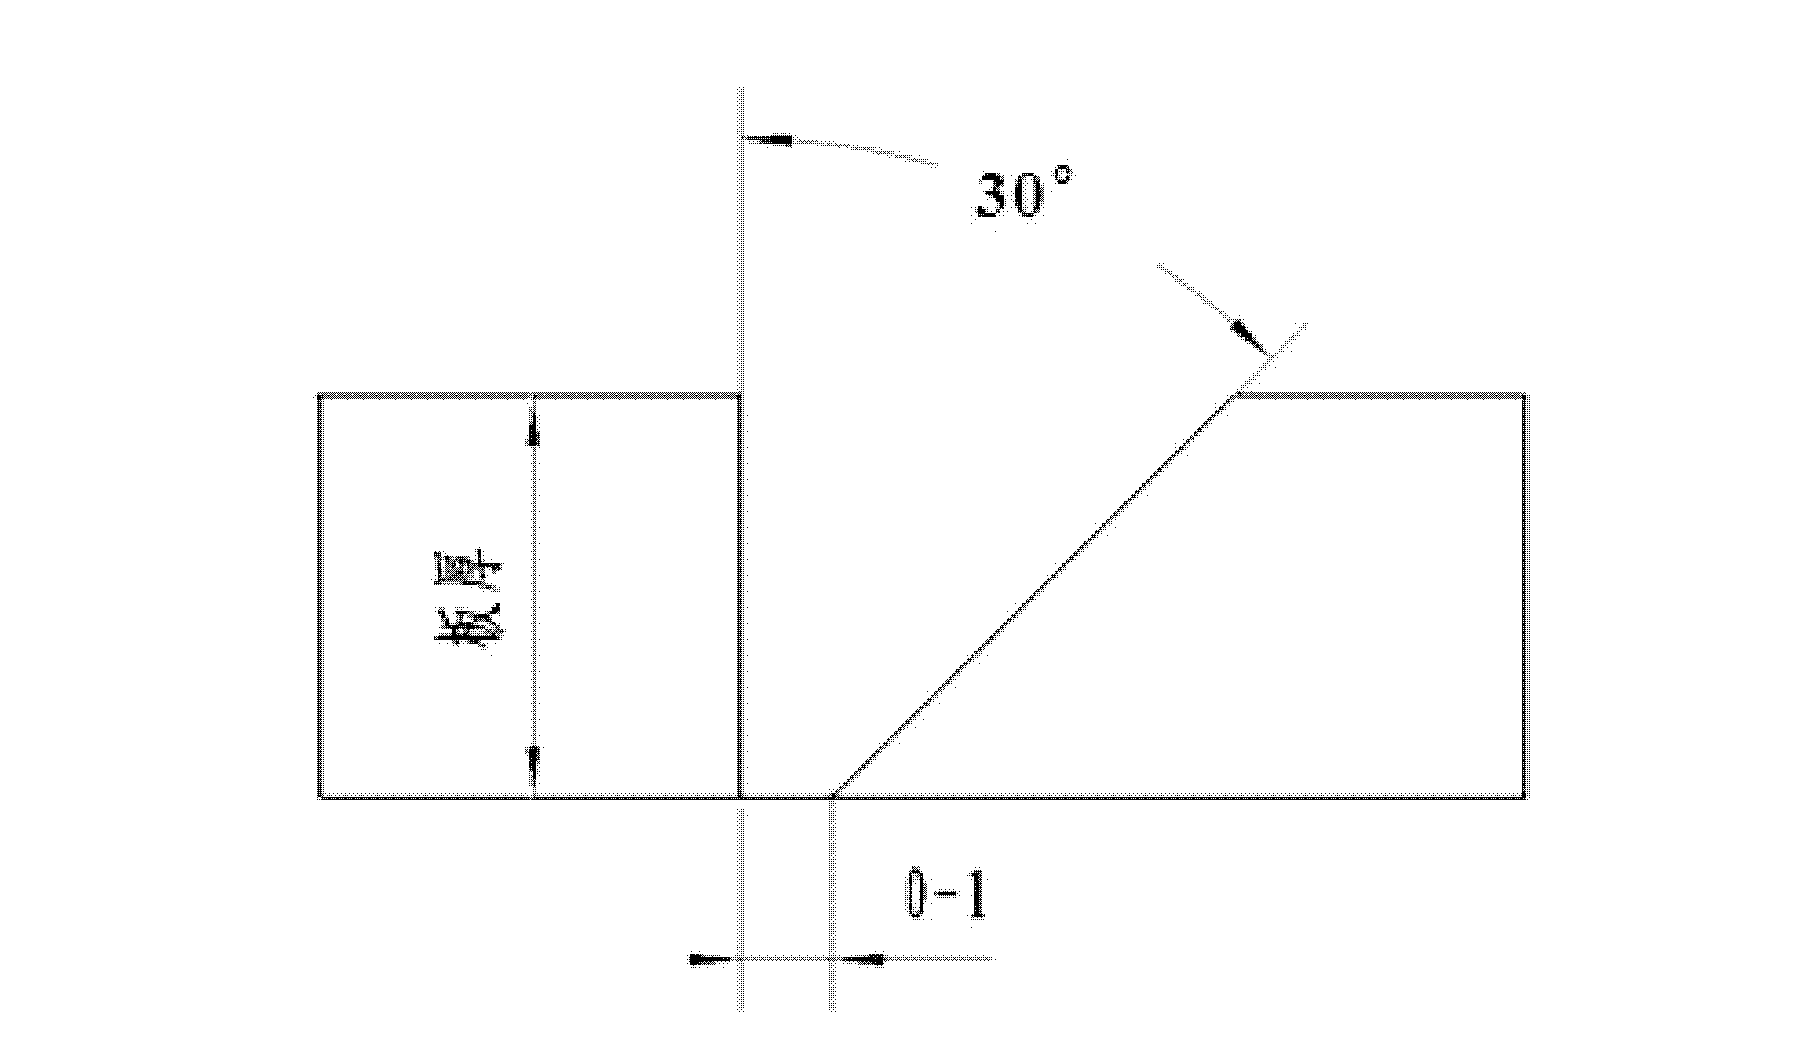 Single edge groove submerged arc welding technique of plate with moderate thickness